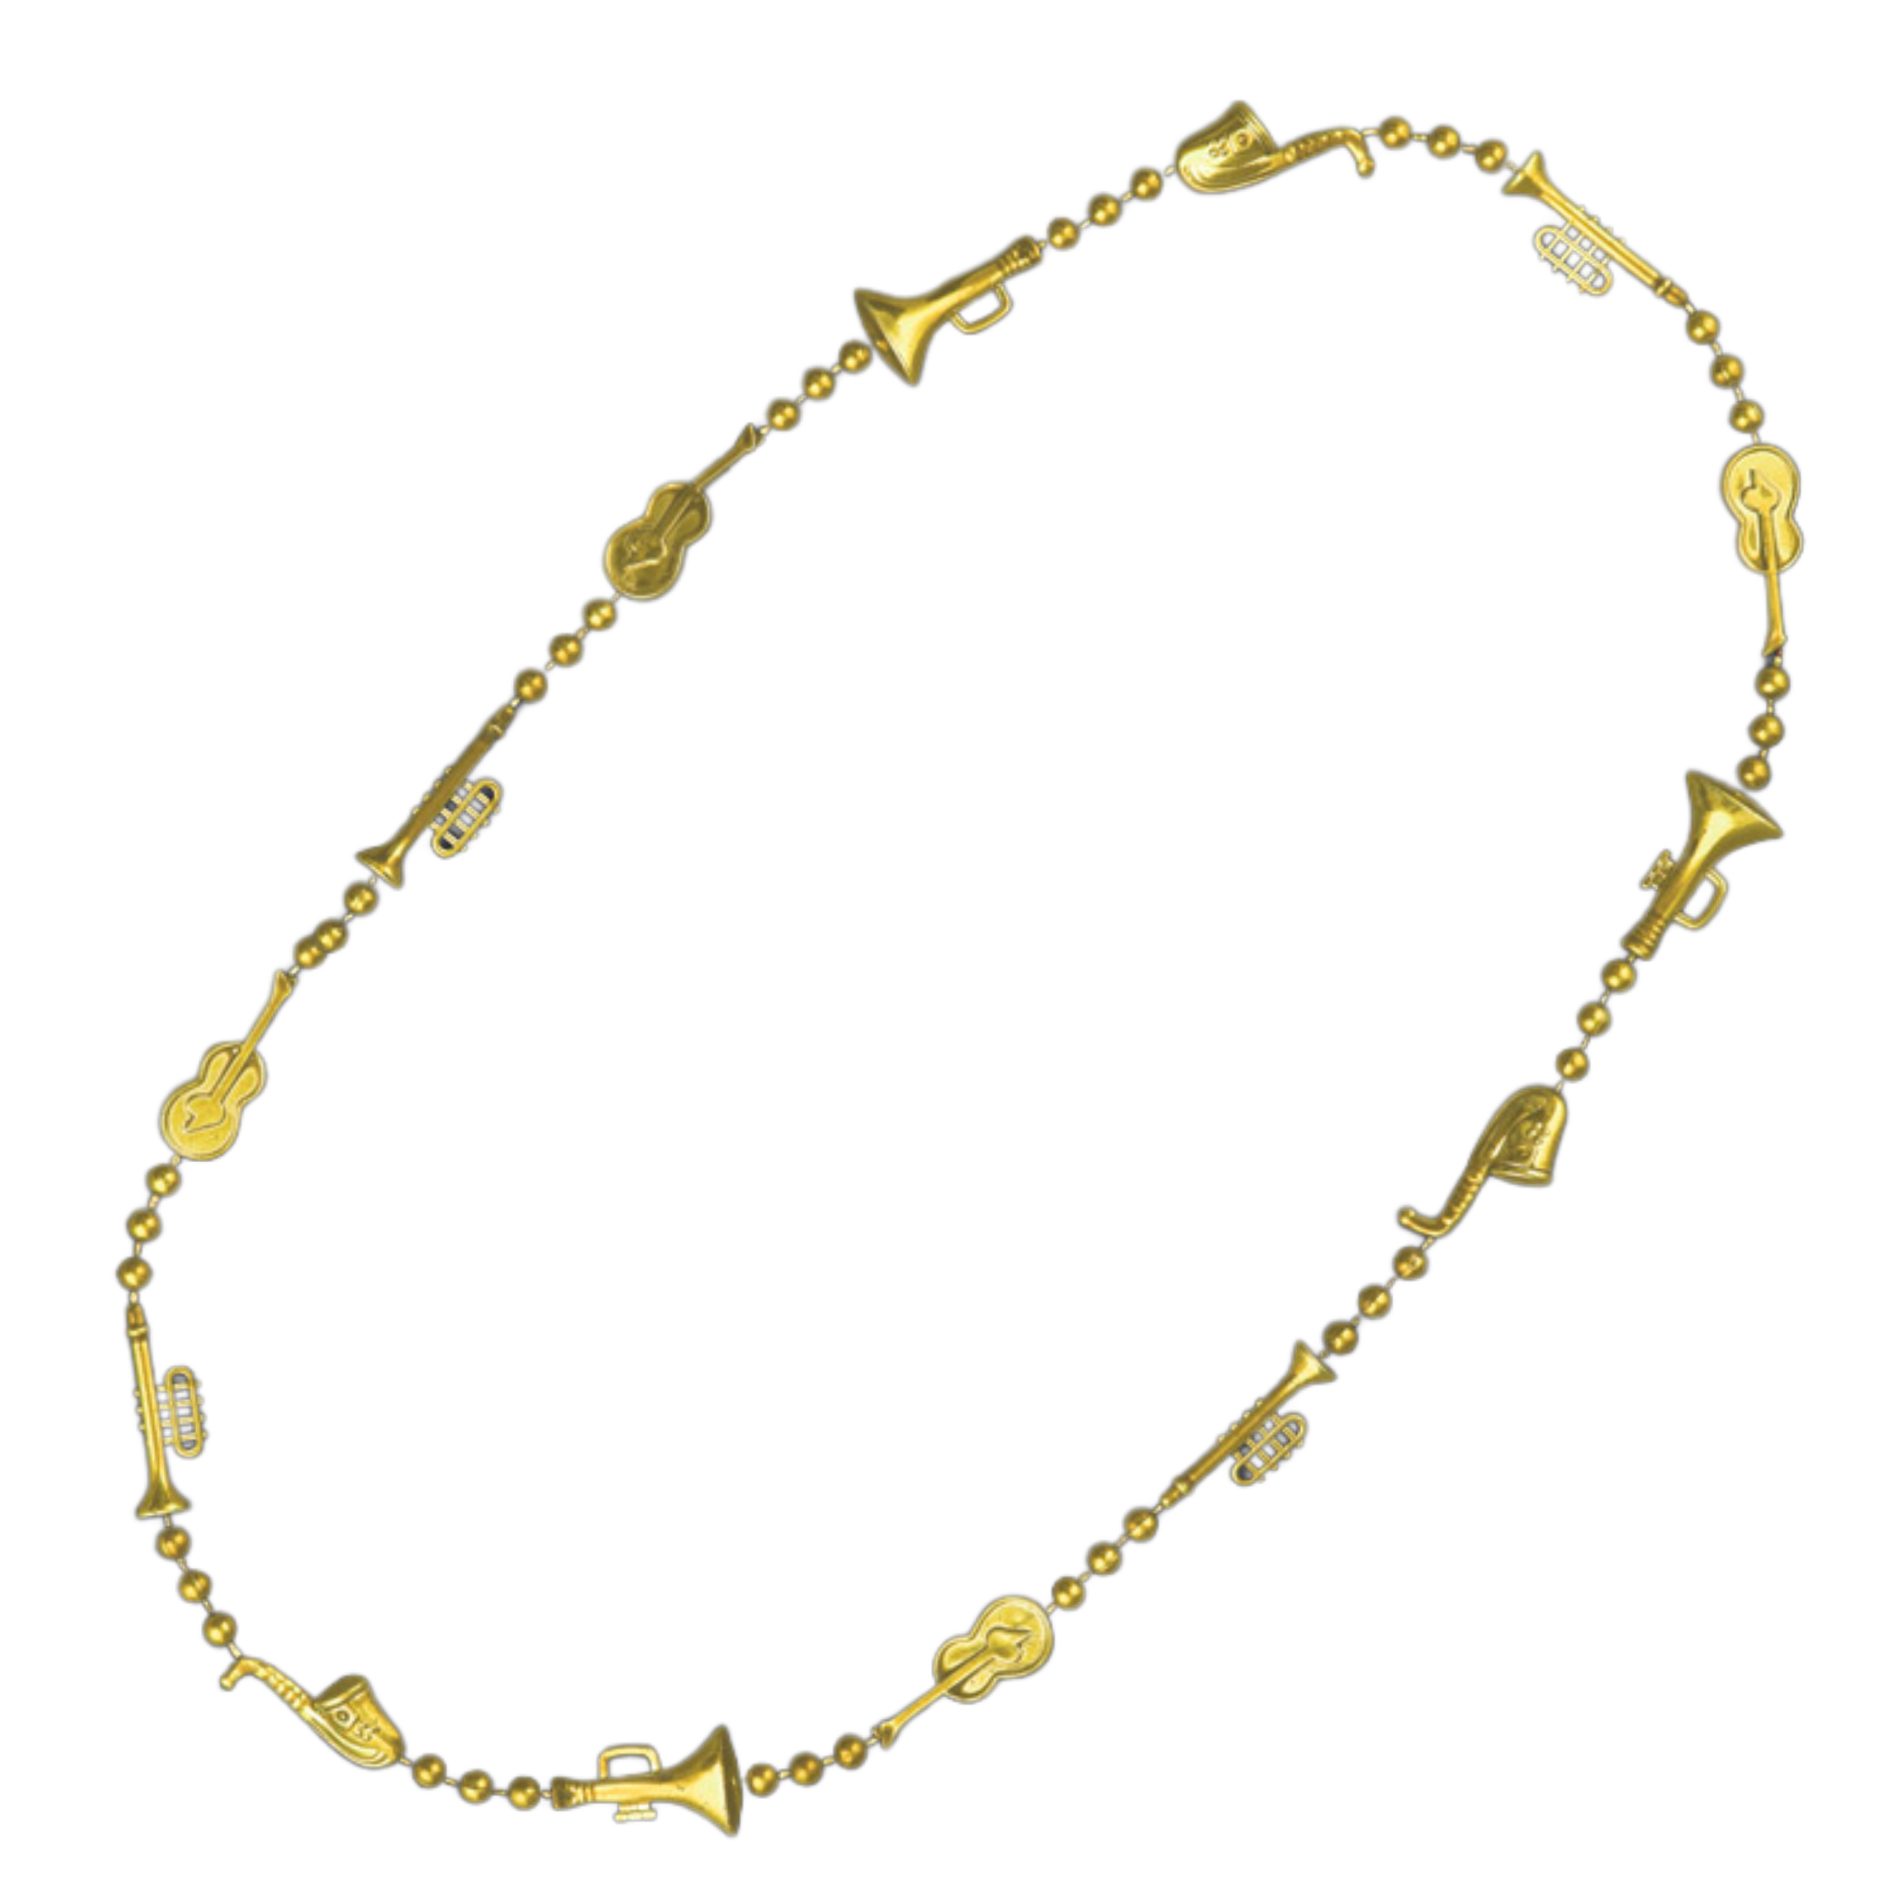 Non Light Up Metallic Gold Plated Jazz Instruments Beaded Necklace Pack of 12 All Products 5